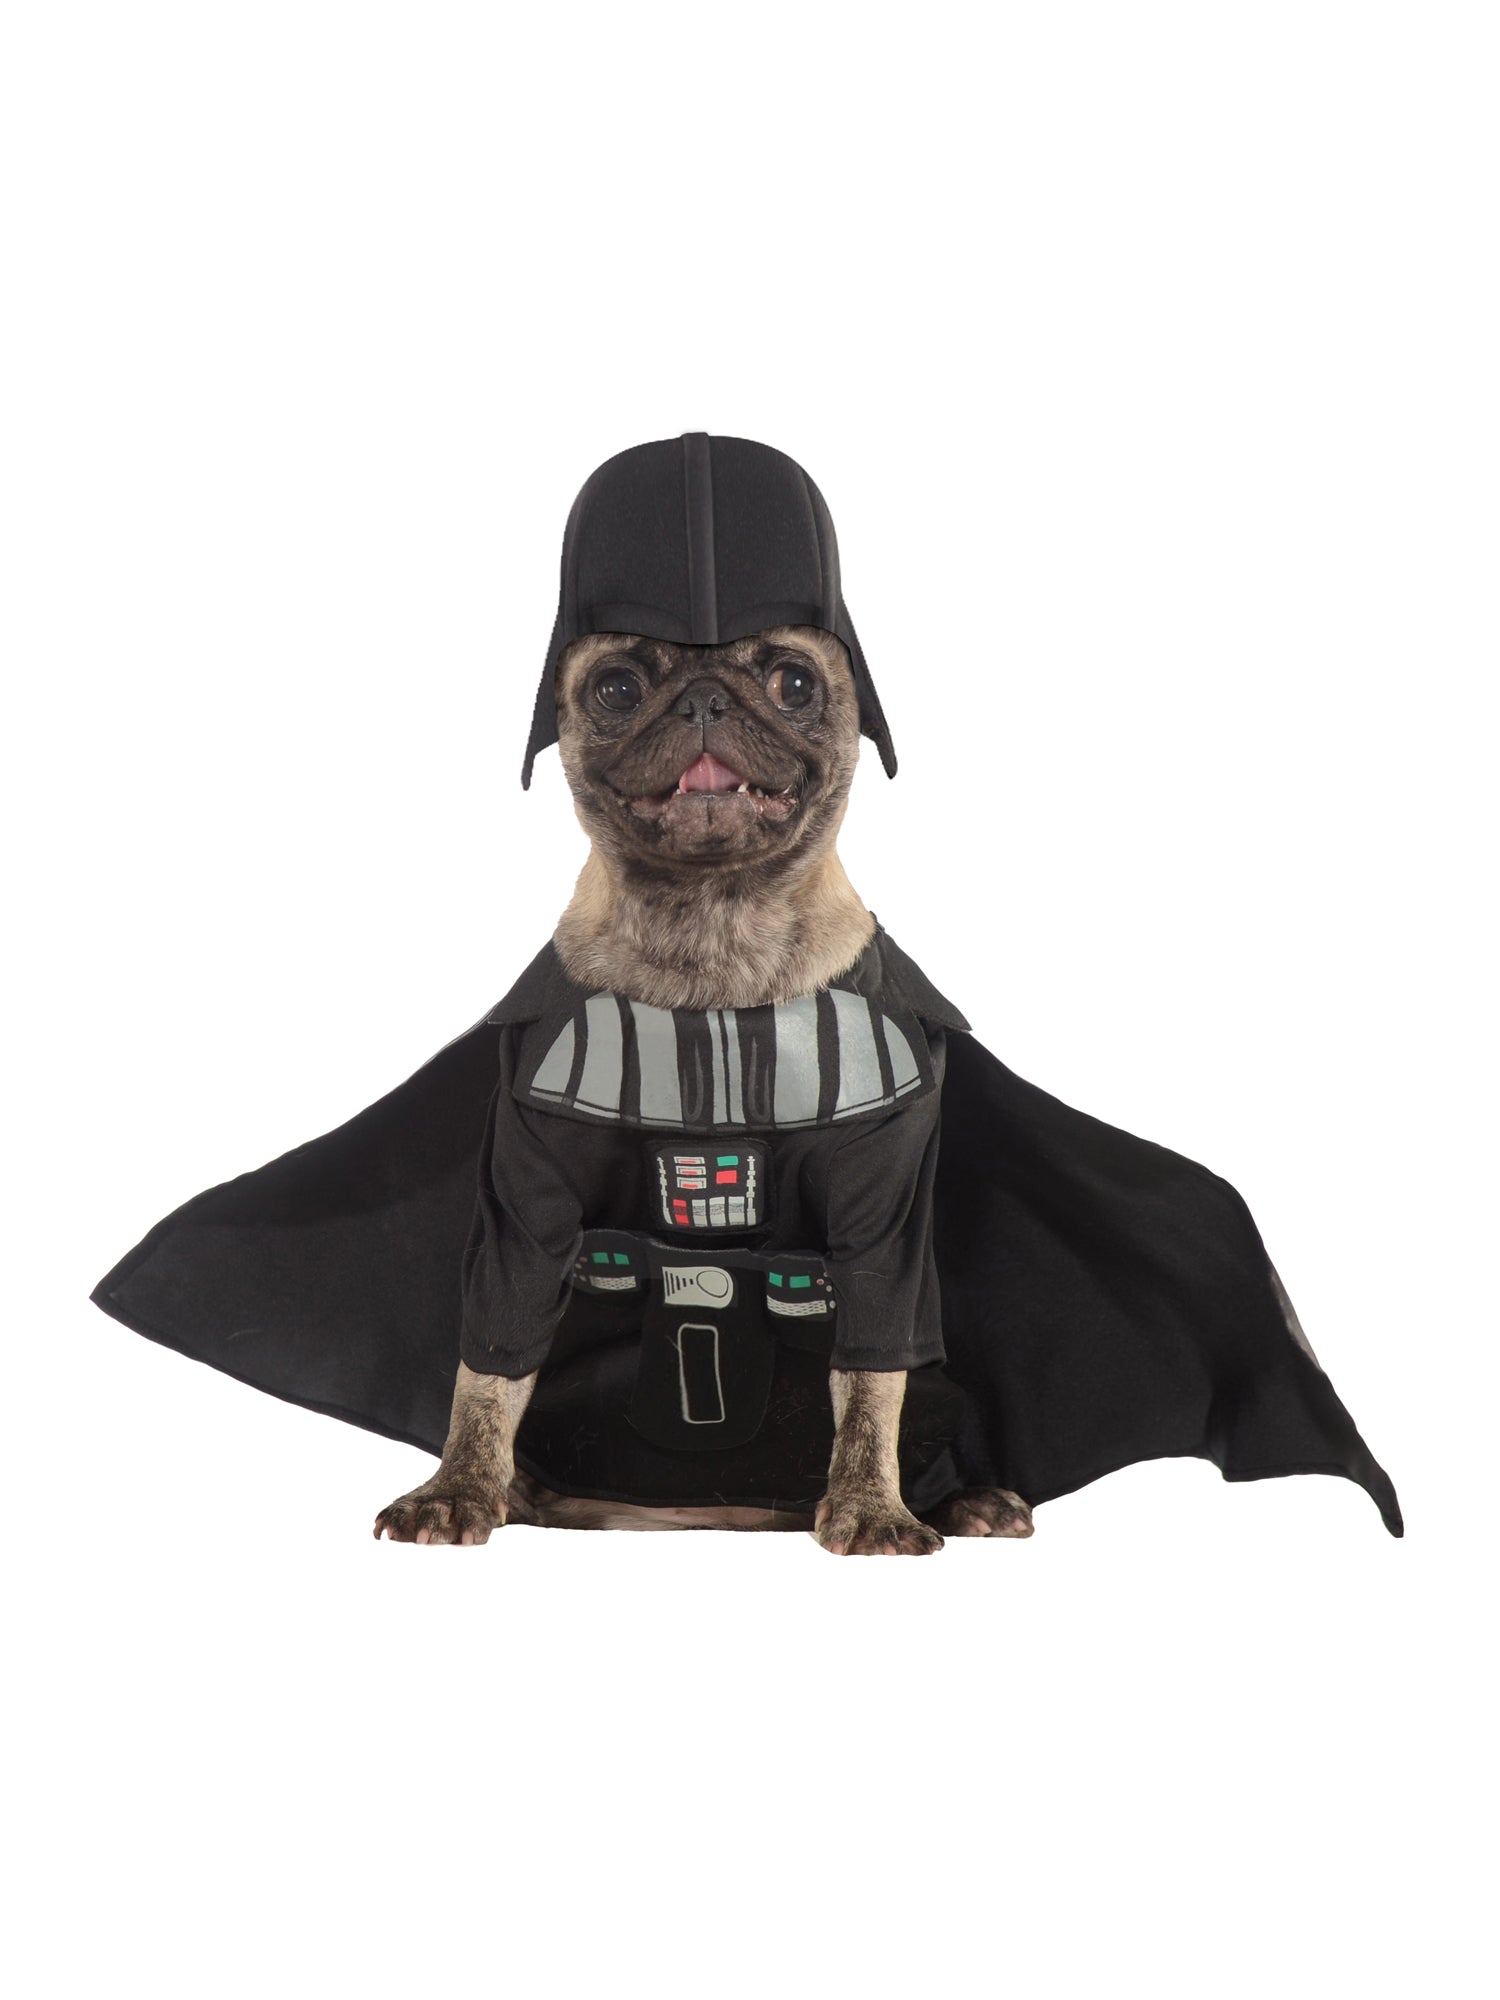 Darth Vader, A New Hope, Episode IV, A New Hope, Multi, Star Wars, Pet Costume, Small, Front